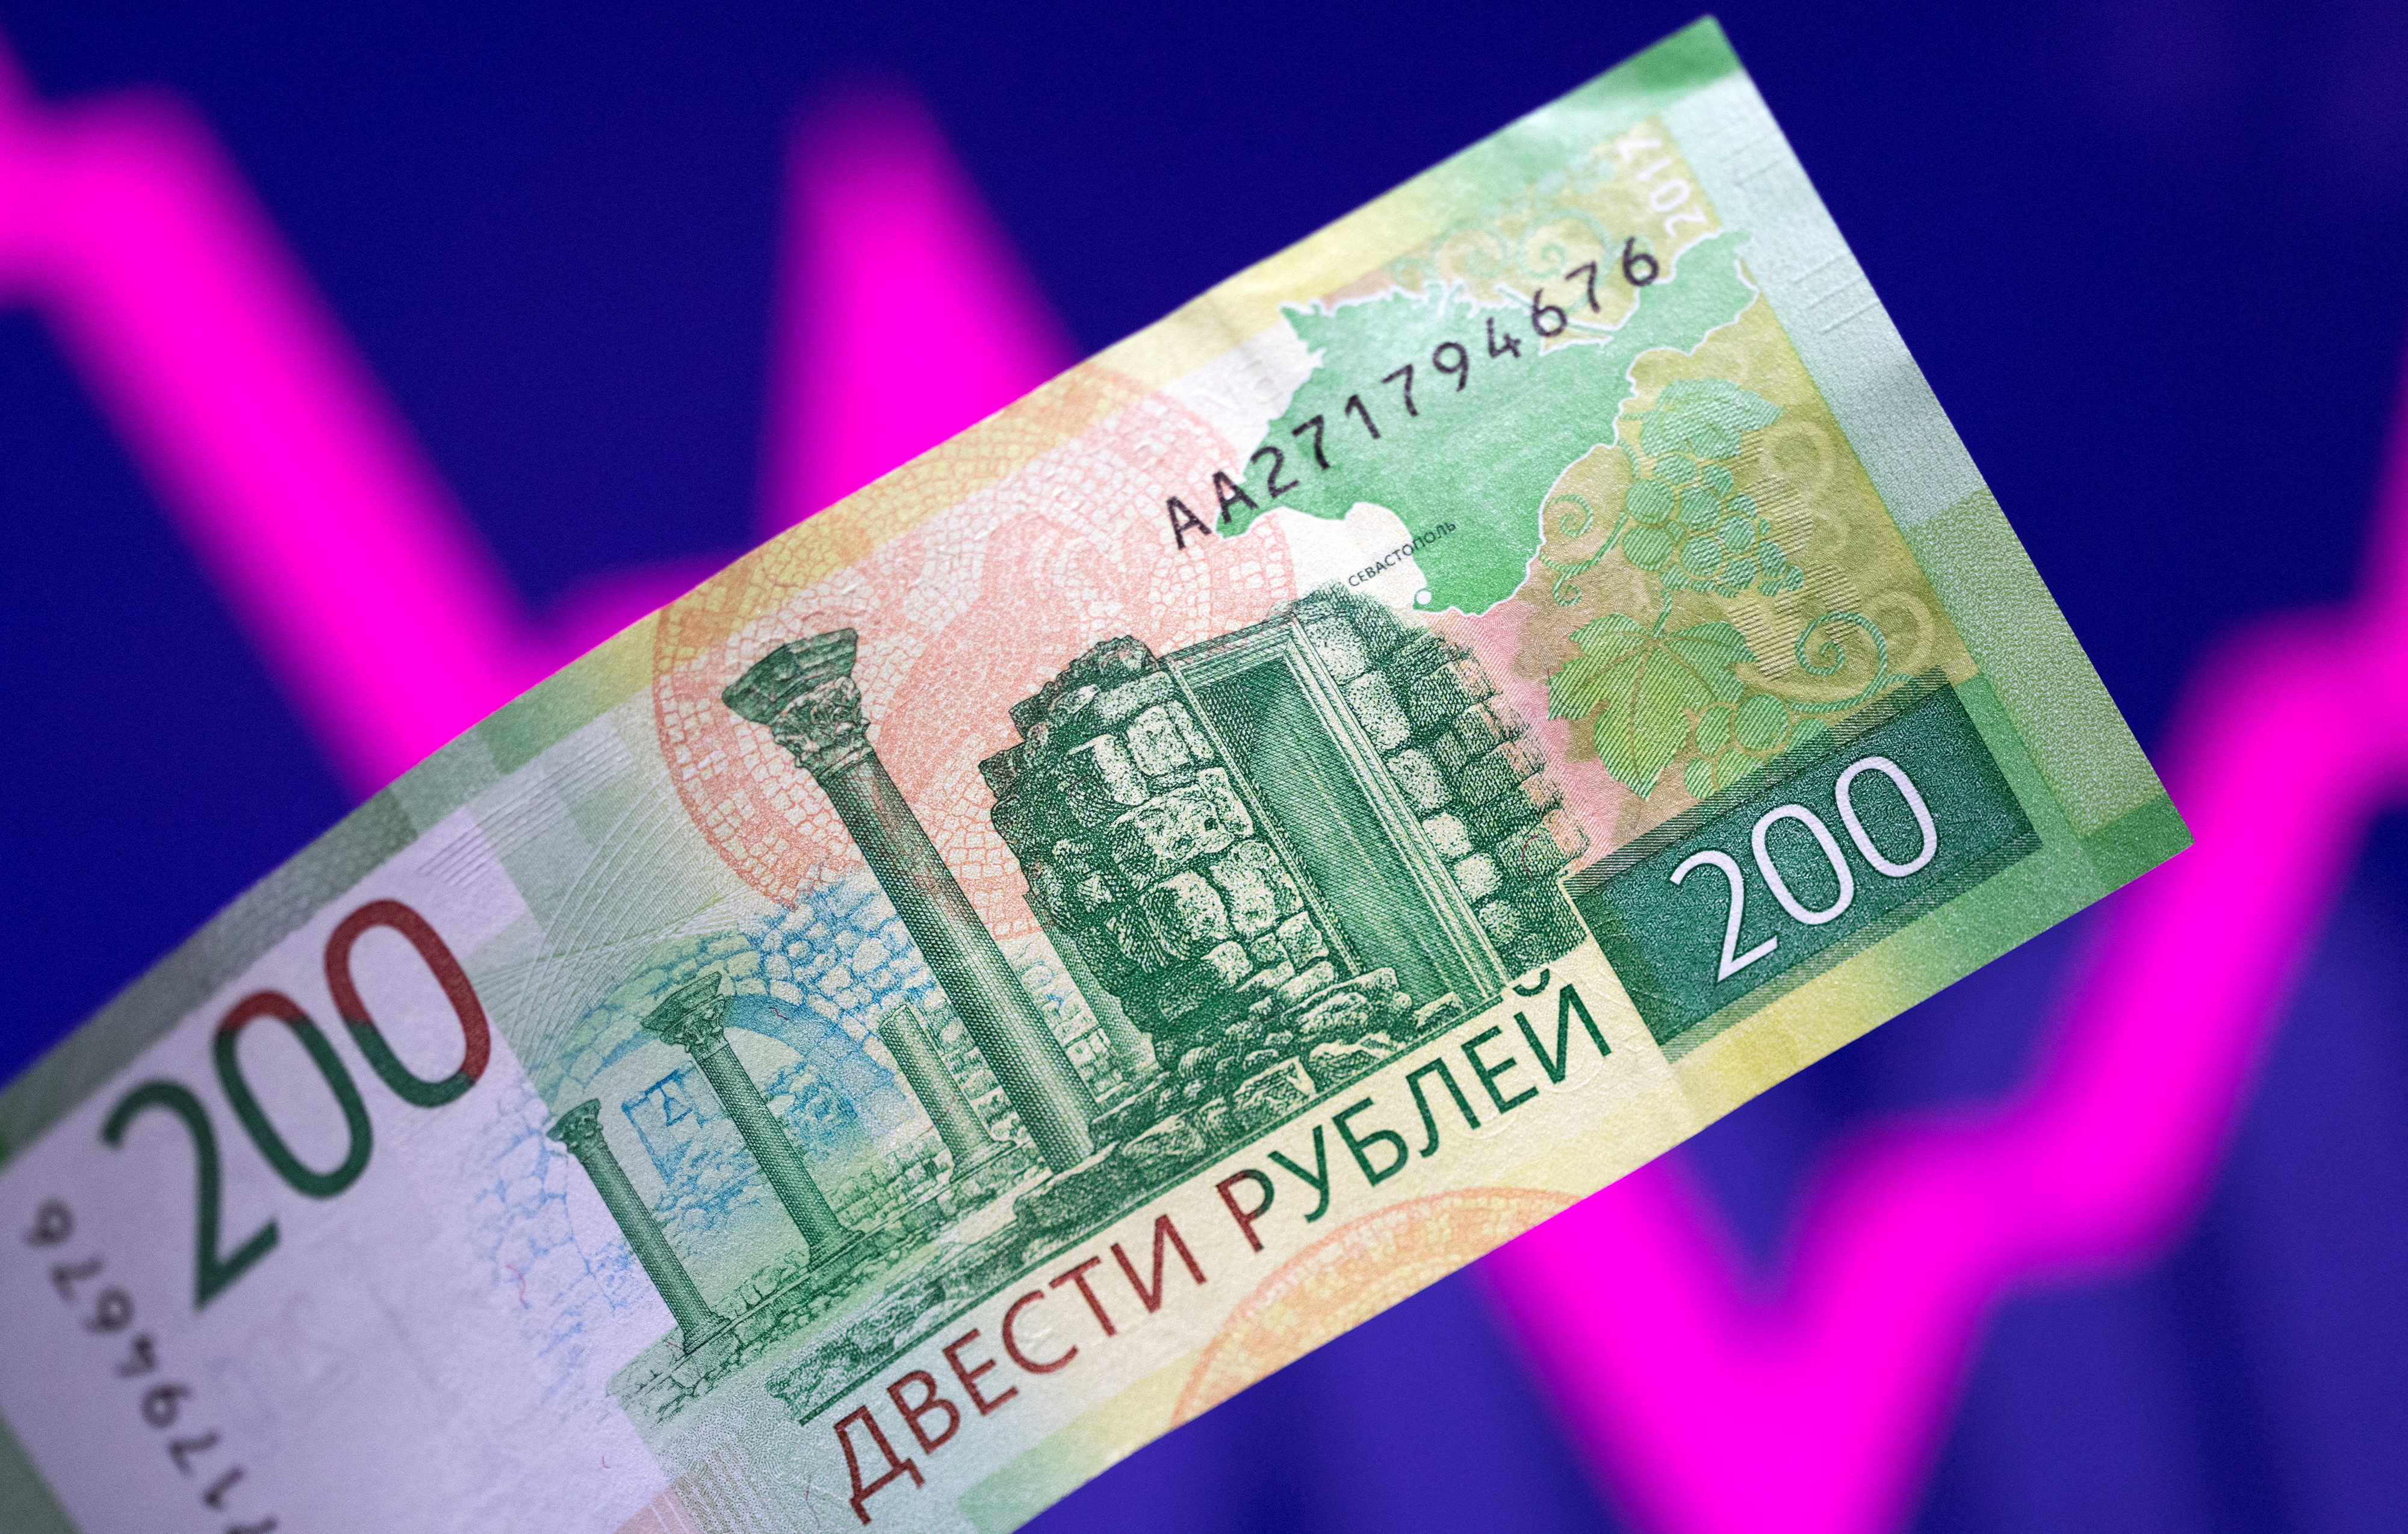 Illustration shows a Russian rouble banknote and a descending and rising stock graph